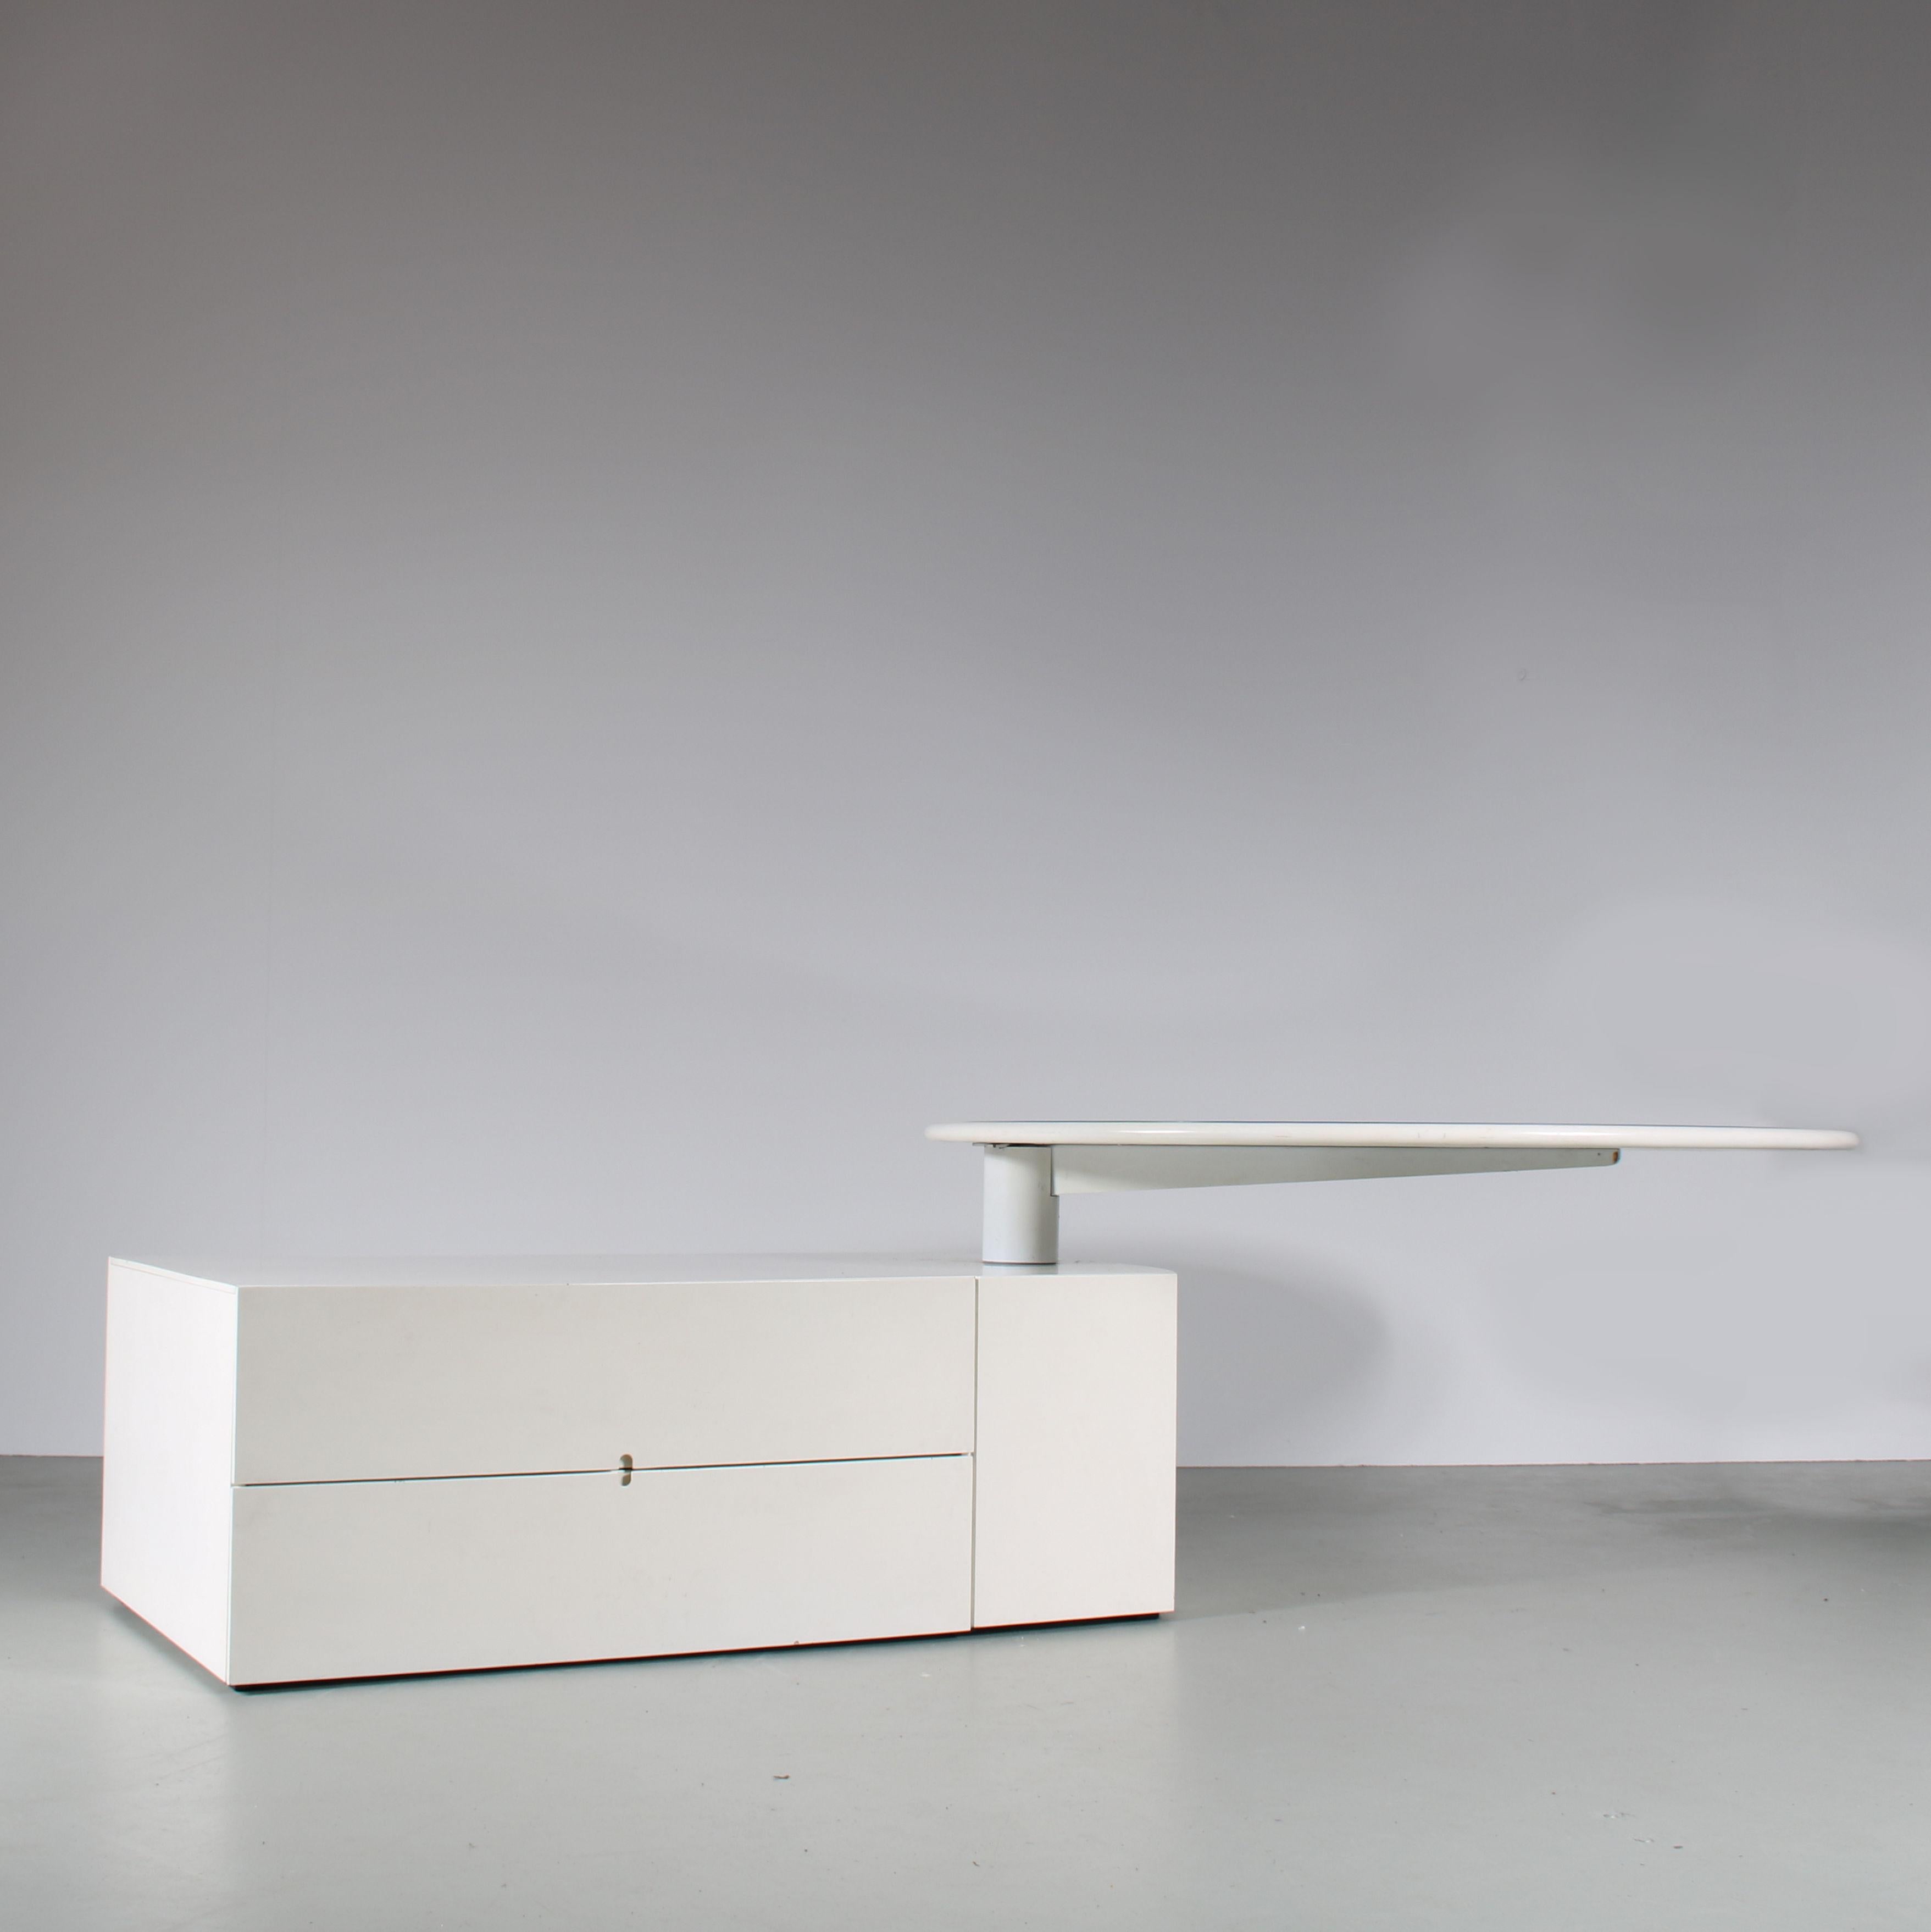 A beautiful dining table, model “Malibu”, designed by Cini Boeri and manufactured by Arflex in Italy around 1980.

This outstanding piece has a white wooden base with storage unit and adjustable round top. It has two drawers that open and close